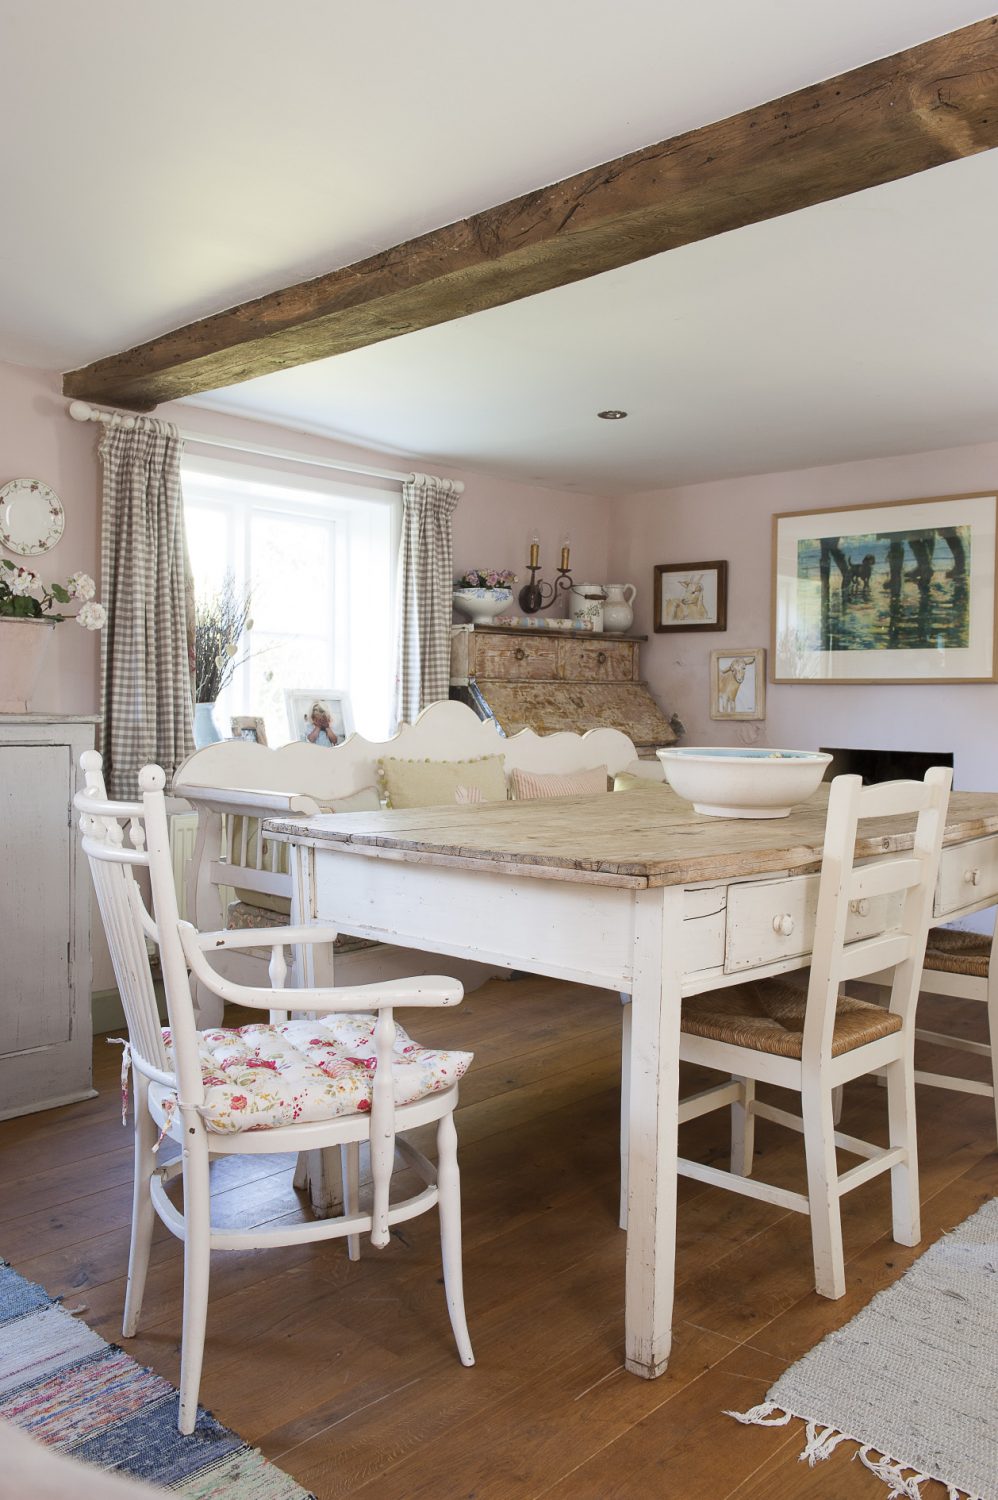 Caroline is a regular visitor to the Ardingly antiques market, where she bought this large, French-style farmhouse table and other accessories that decorate the large living area at the front of the house